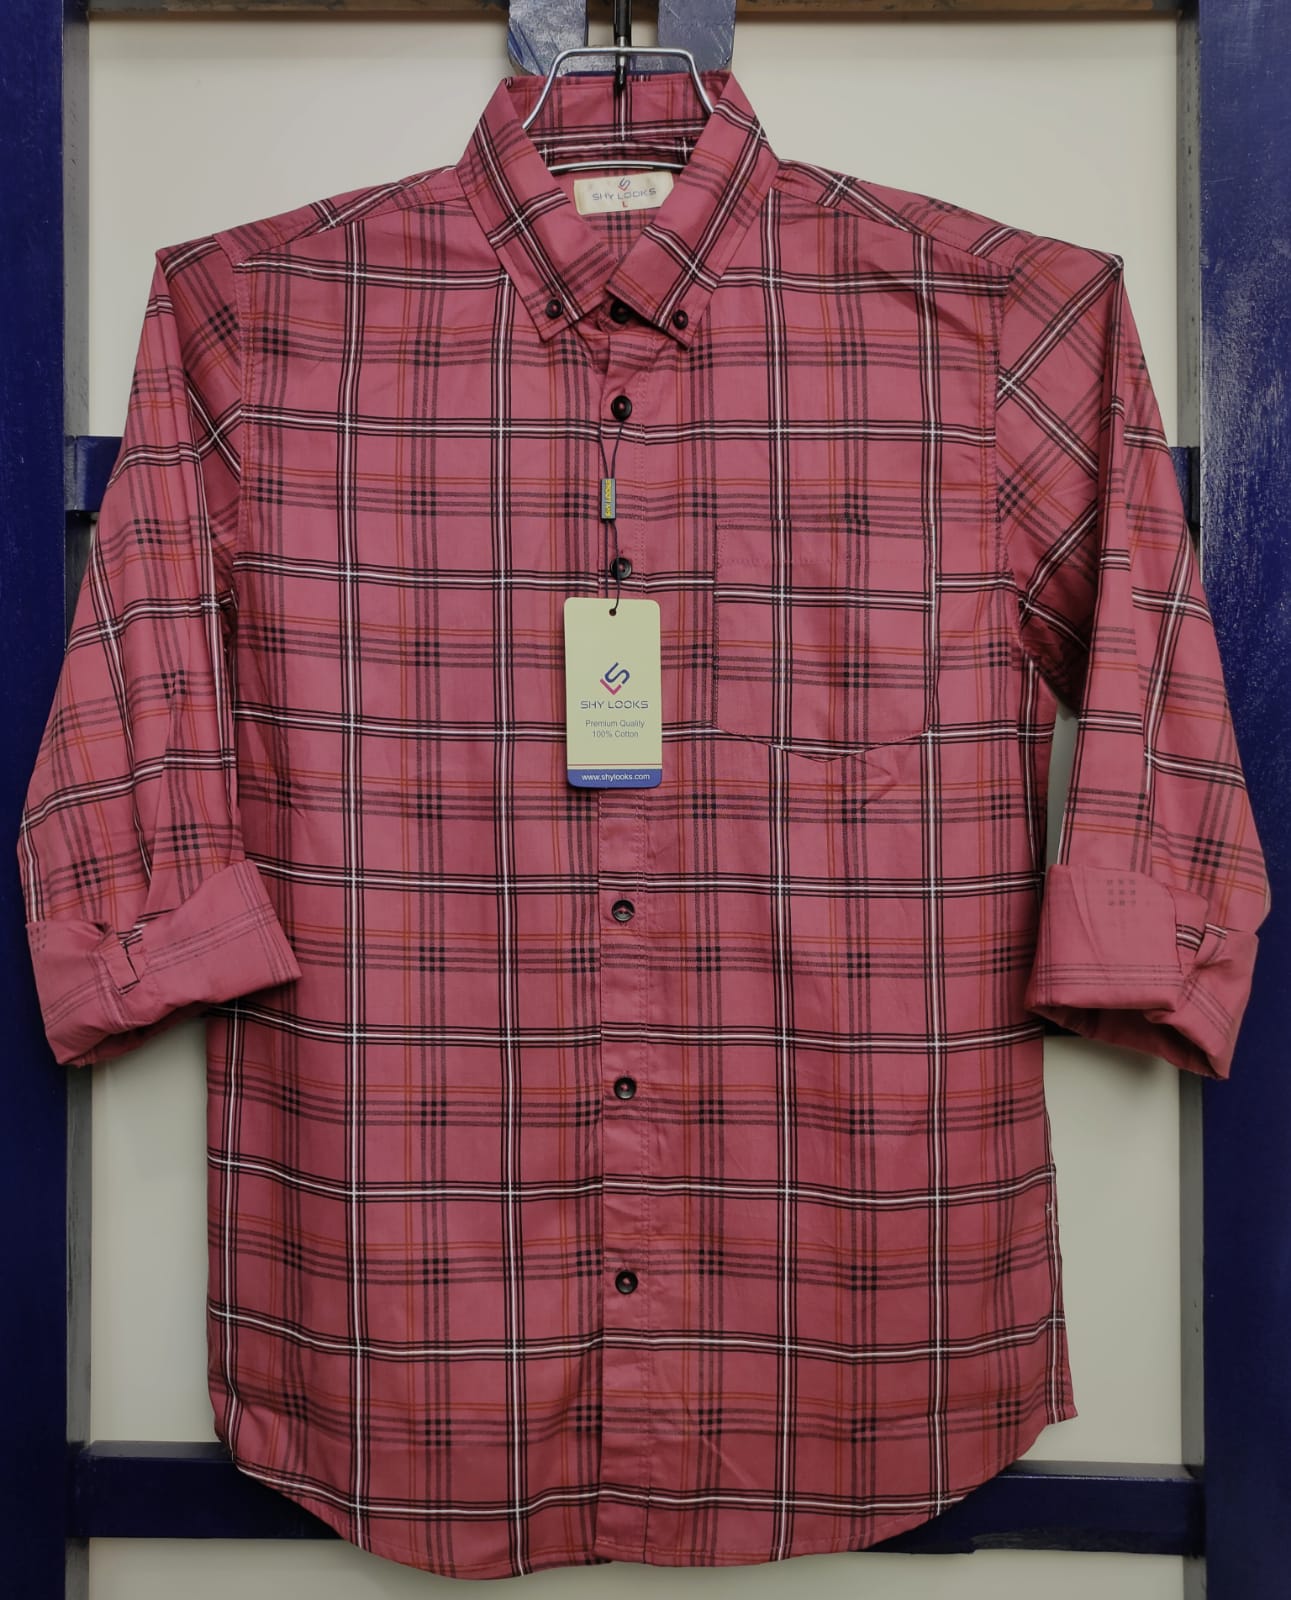 Exclusive Full Sleeve Check Shirt for Formal and Casual (SBD) Details